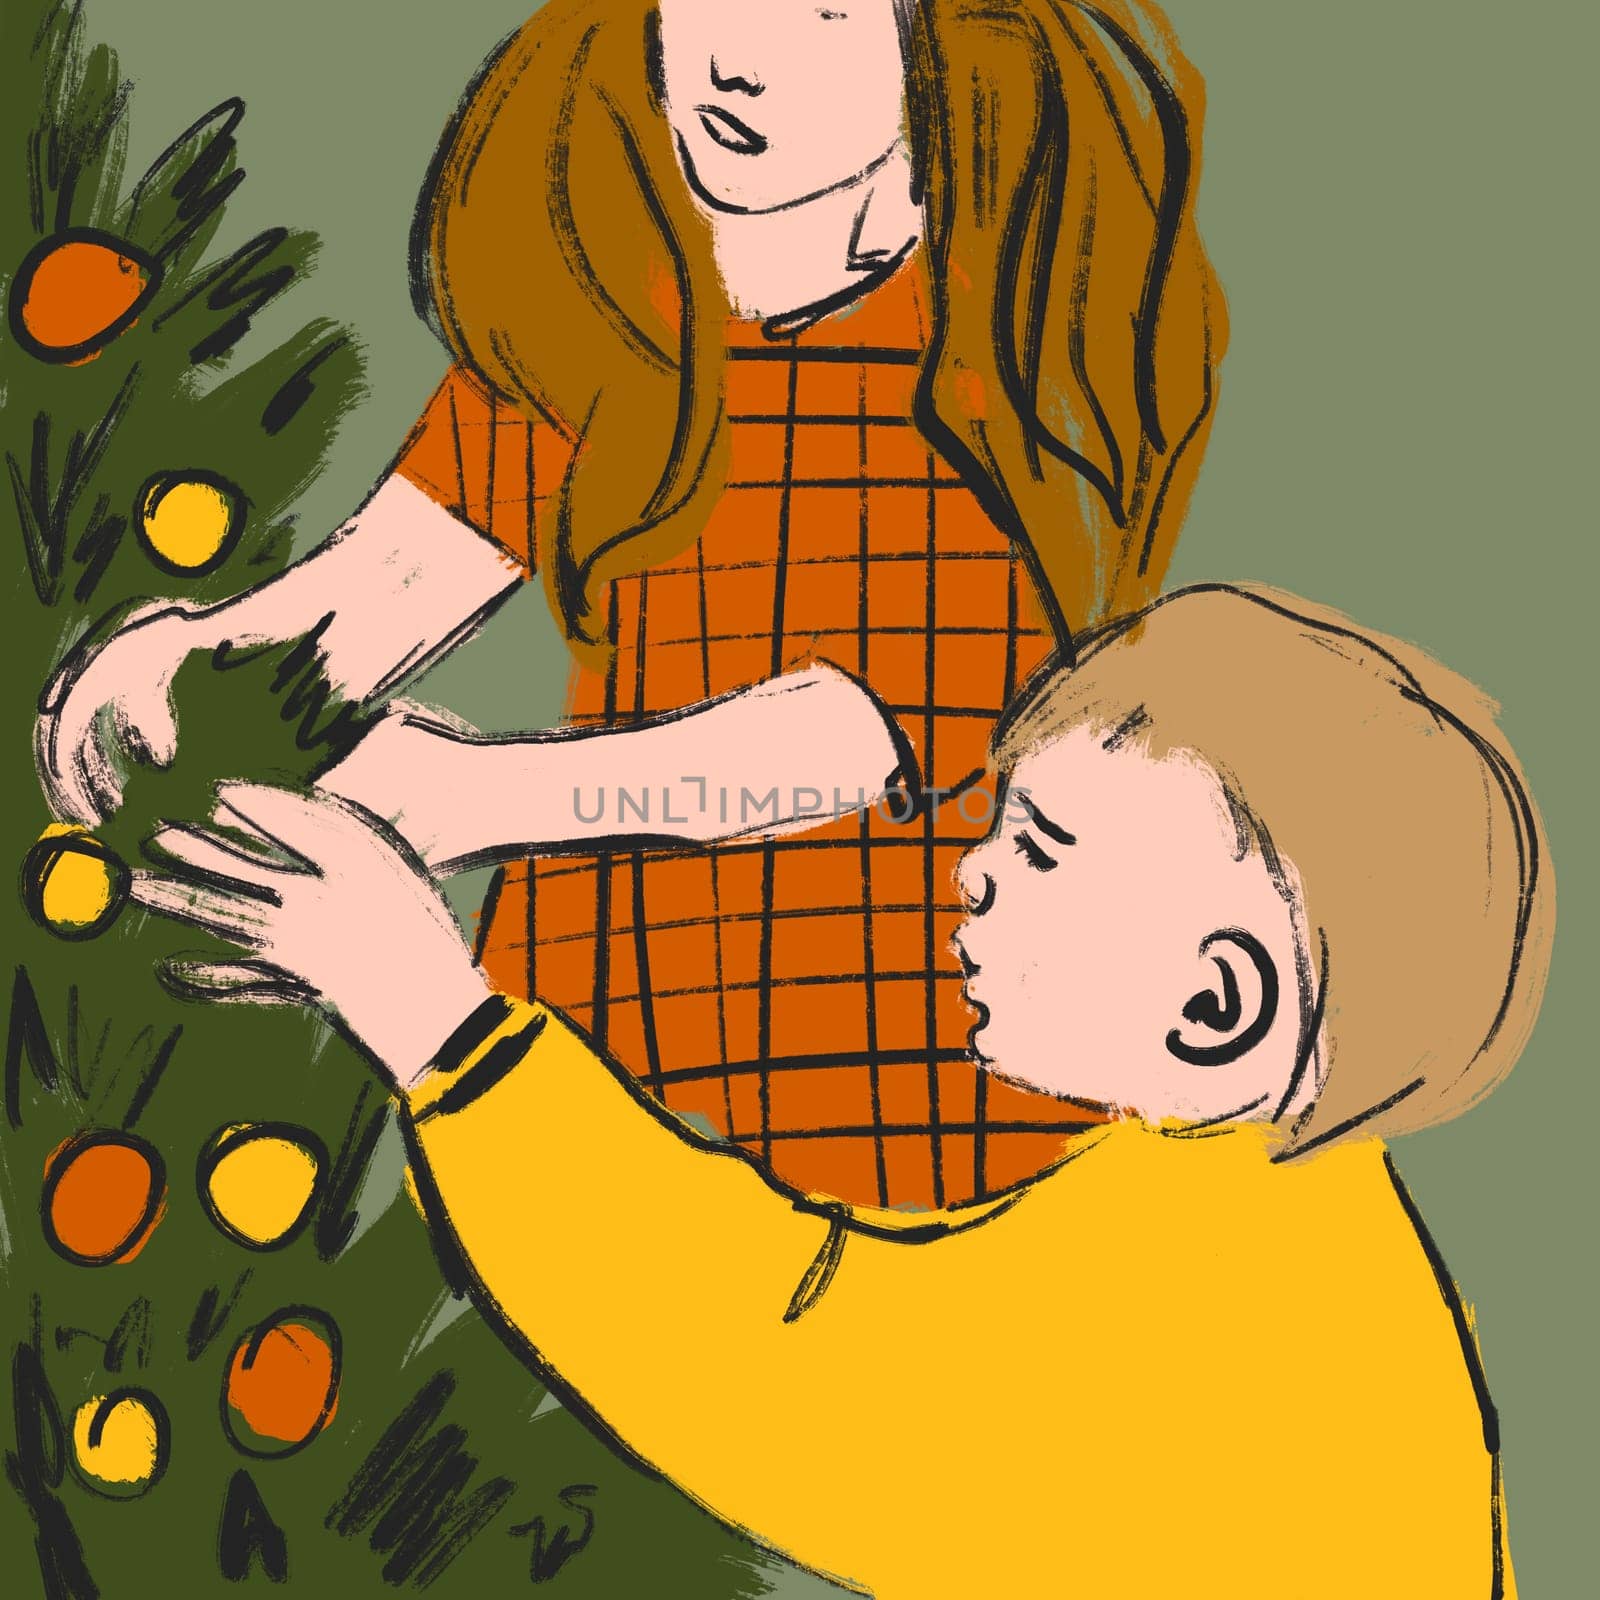 Hand drawn illustration of mother and boy child decorating Christmas tree. Family together on holiday, loved ones, emotional reunion of family members. Modern contemporary sketch style print in yellow green orange colors. Pine tree with baubles decorations, winter festive time